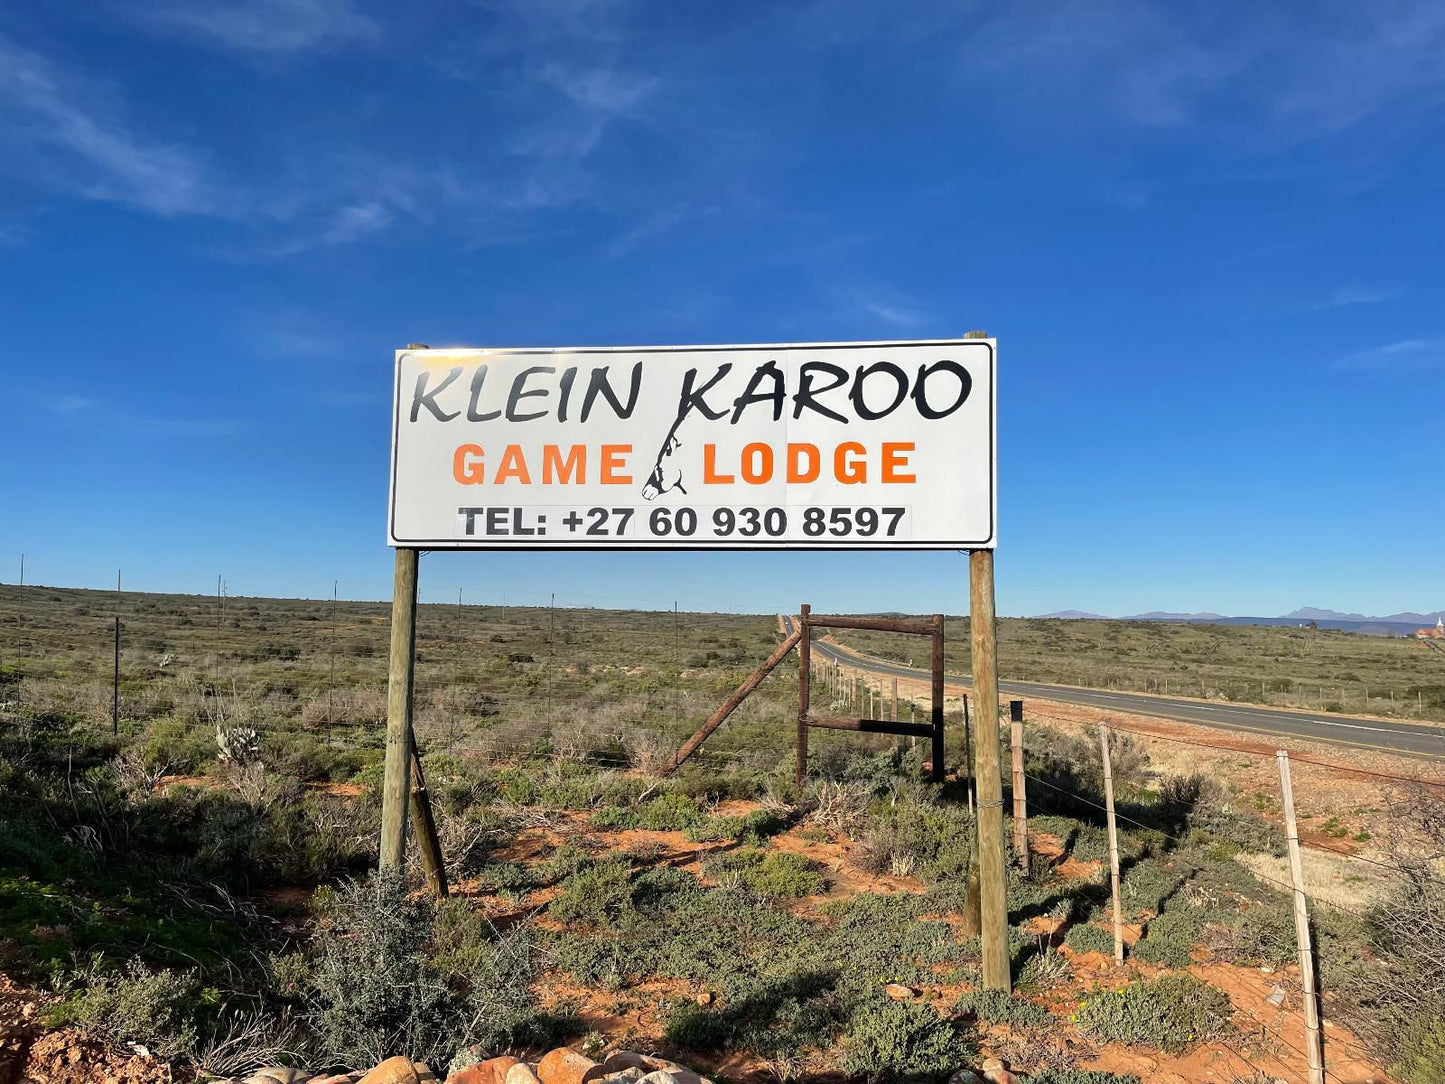 Klein Karoo Game Lodge Oudtshoorn Western Cape South Africa Complementary Colors, Cactus, Plant, Nature, Sign, Text, Desert, Sand